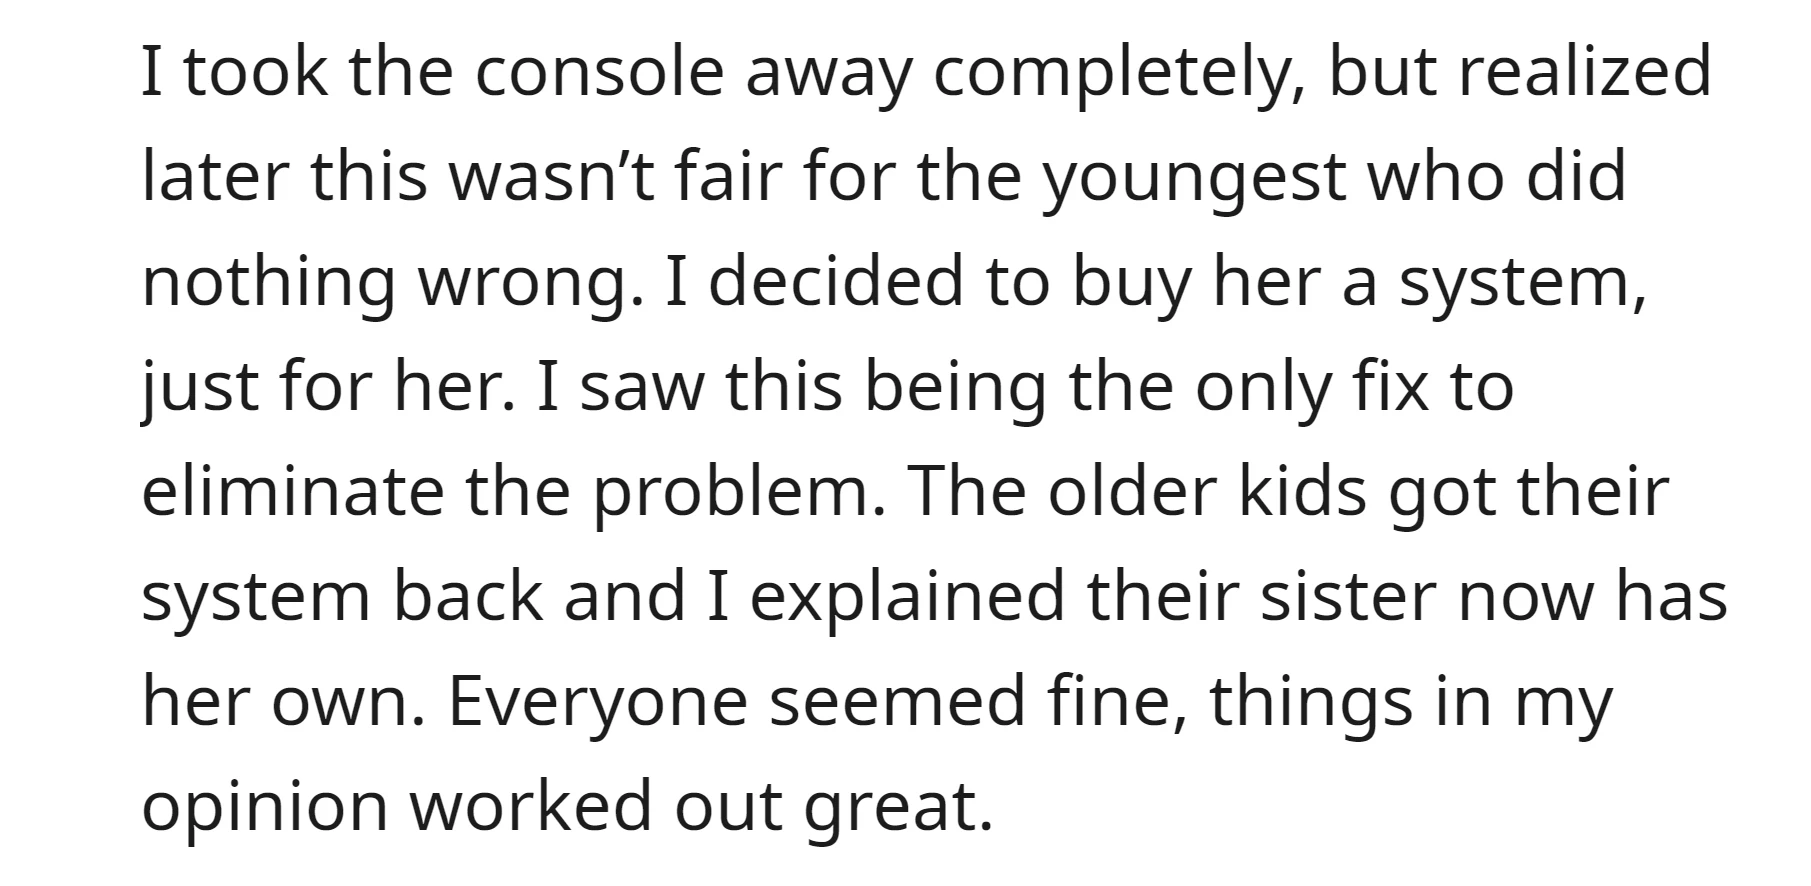 The OP bought the youngest a separate gaming system and gave the older kids their console back